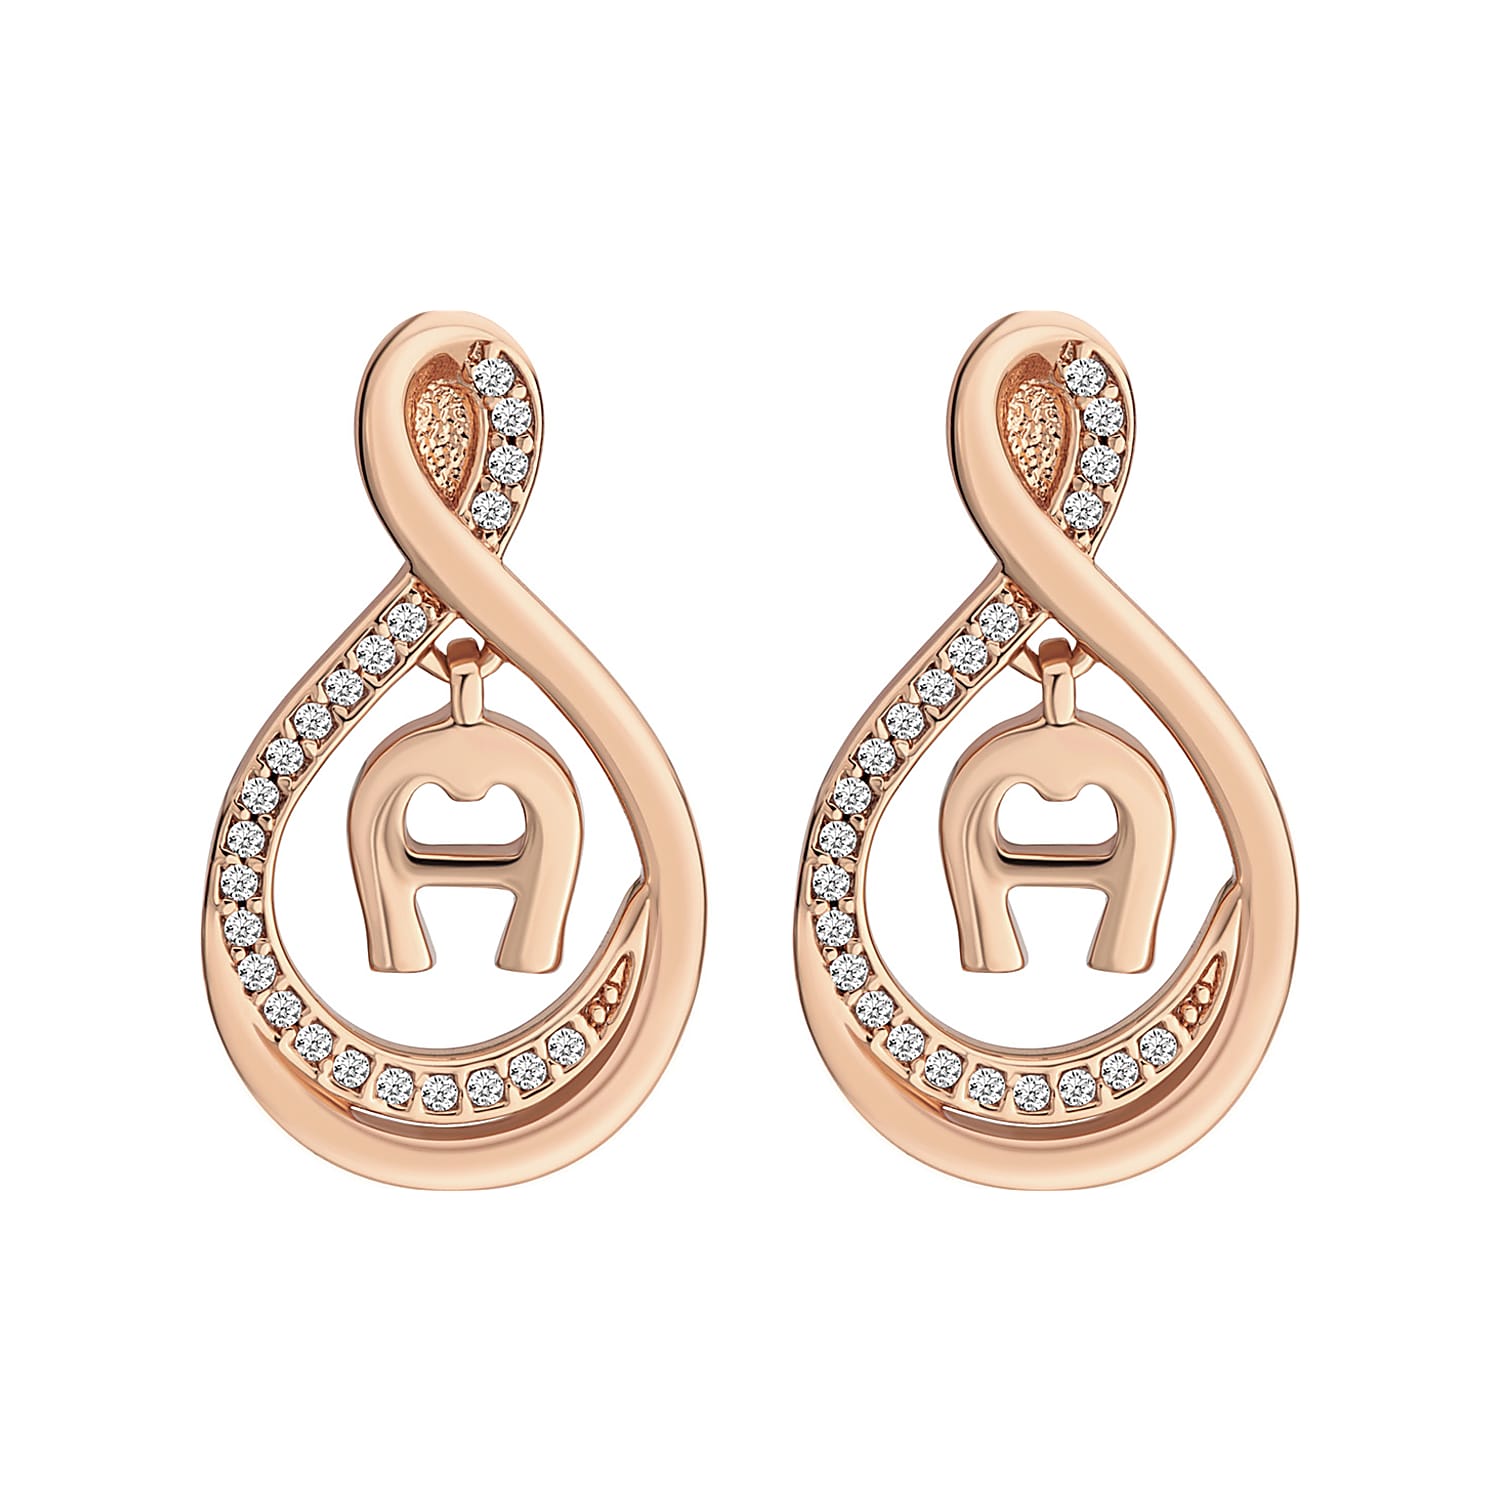 Earrings infinity with A logo rosegold